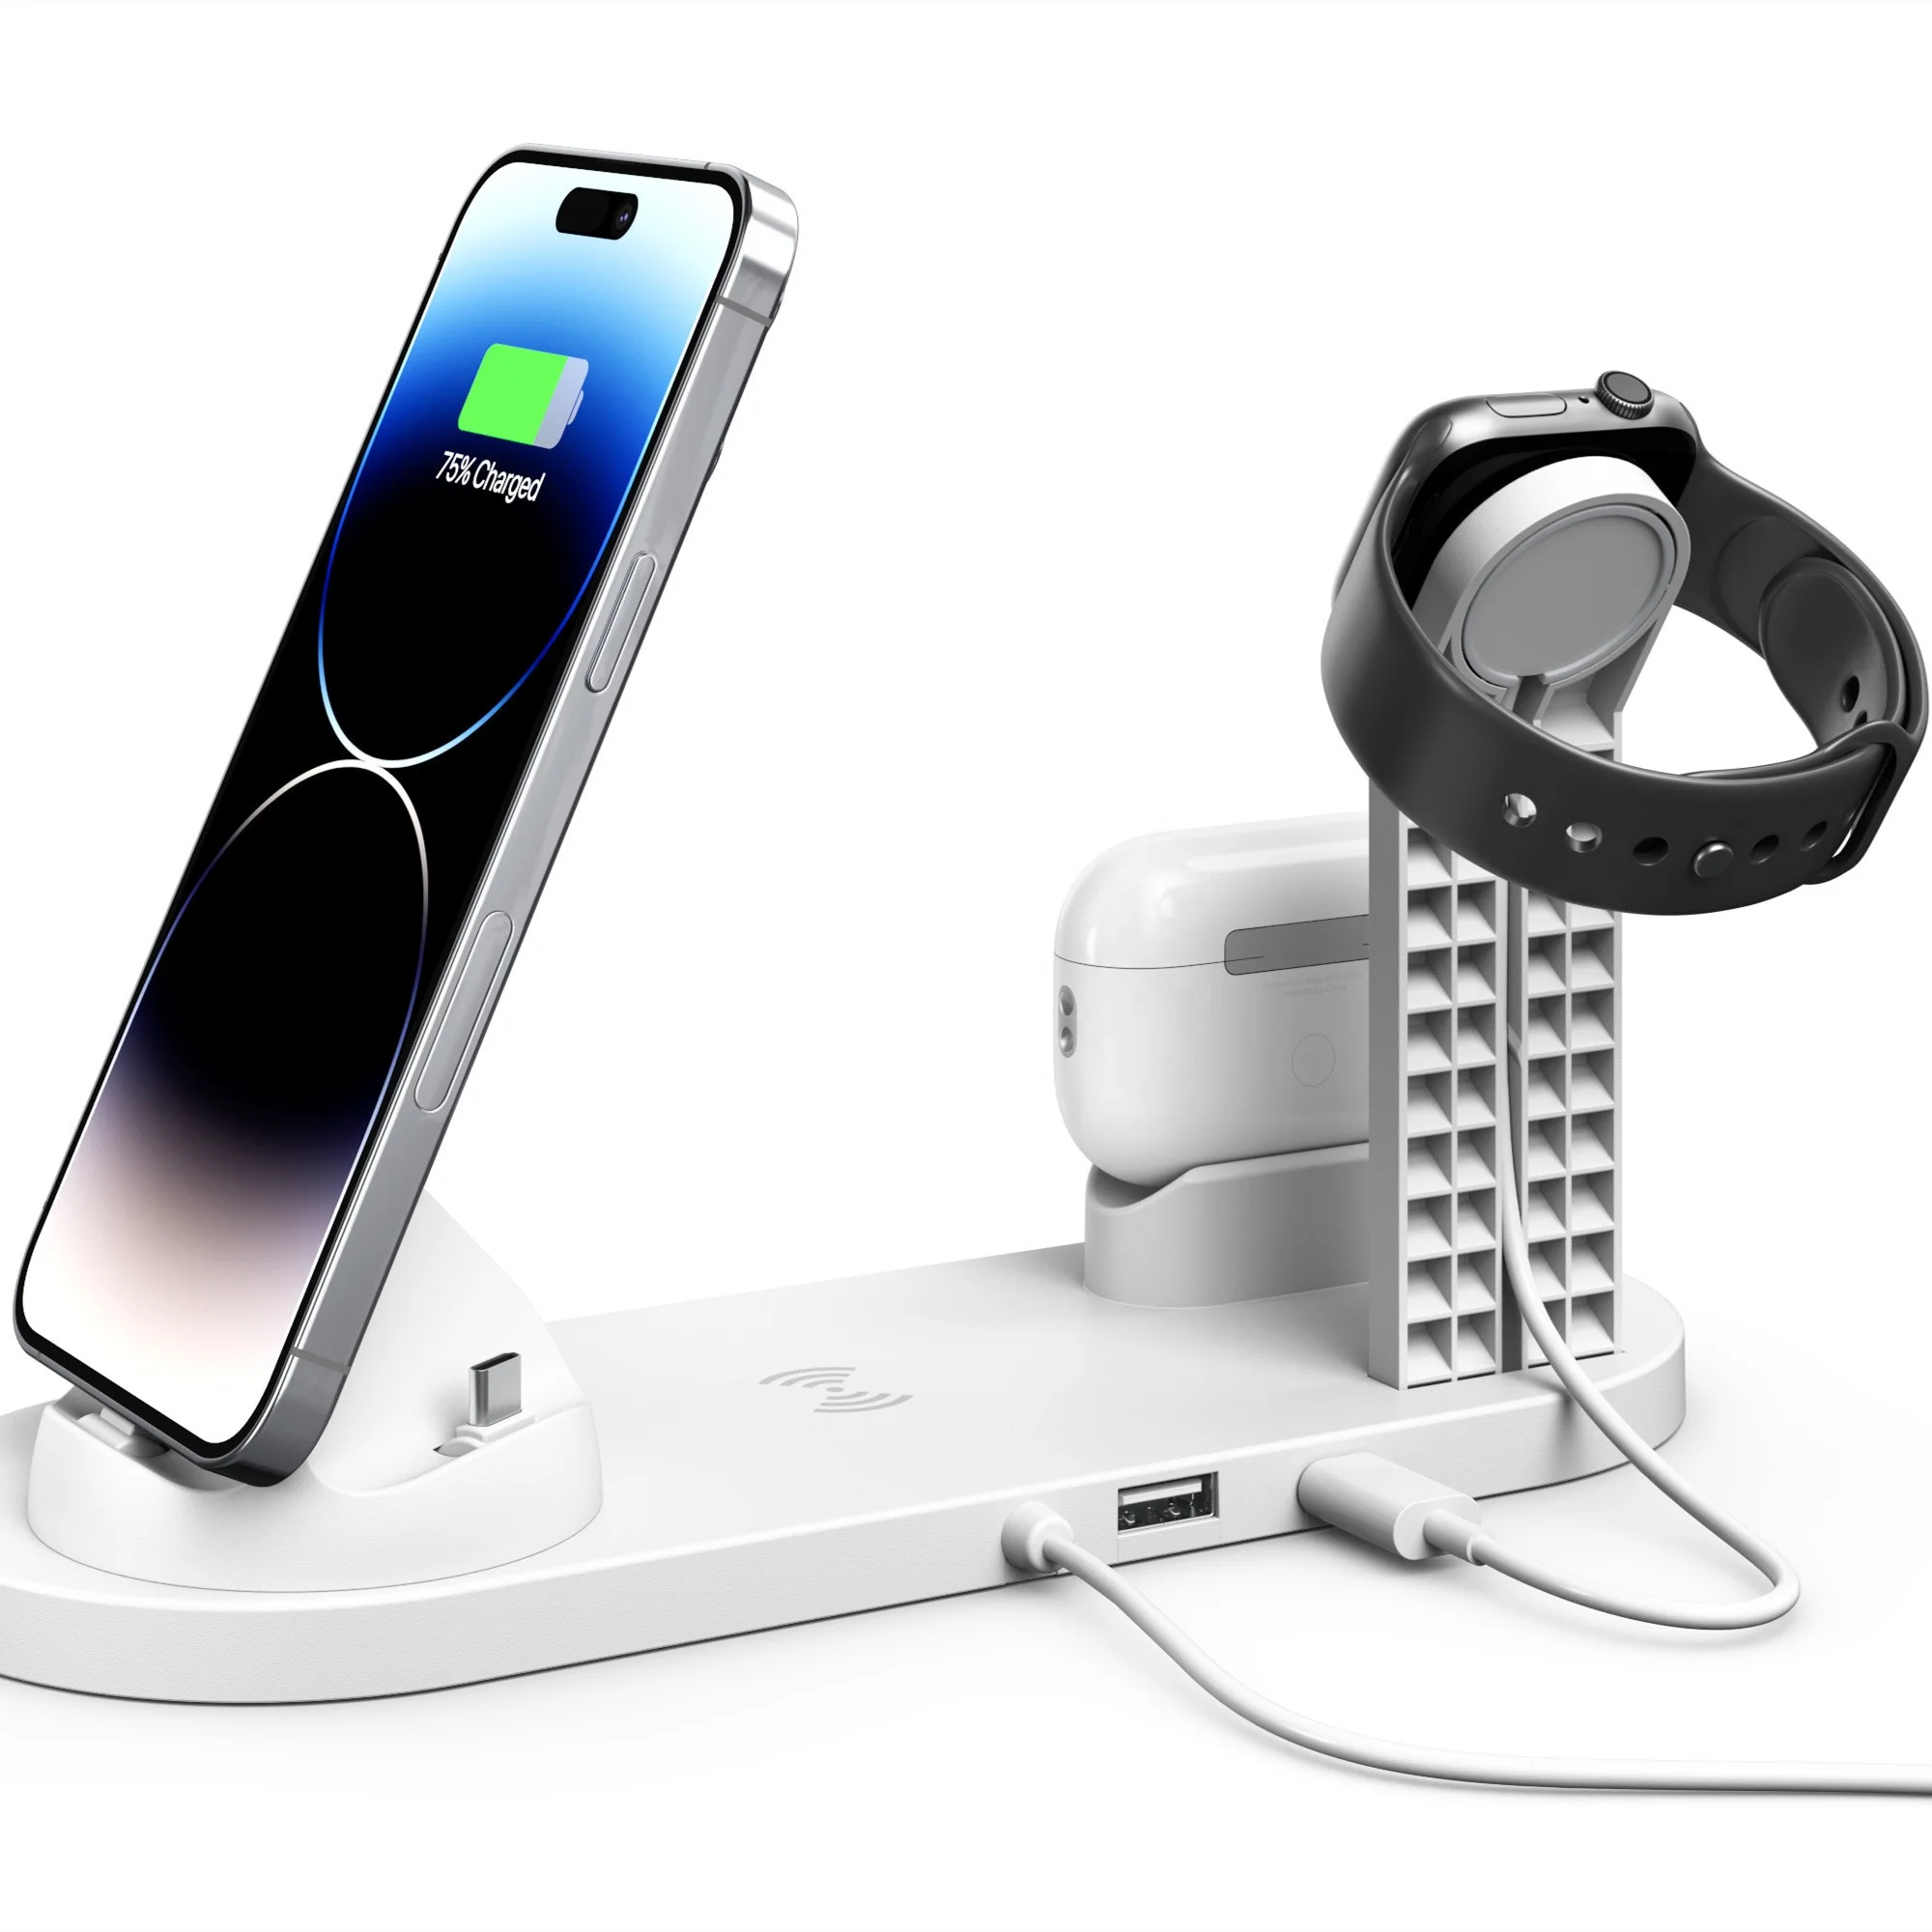 Hot Selling 4 In 1 Wireless Charger Station For Iphone 12 13 Pro Max